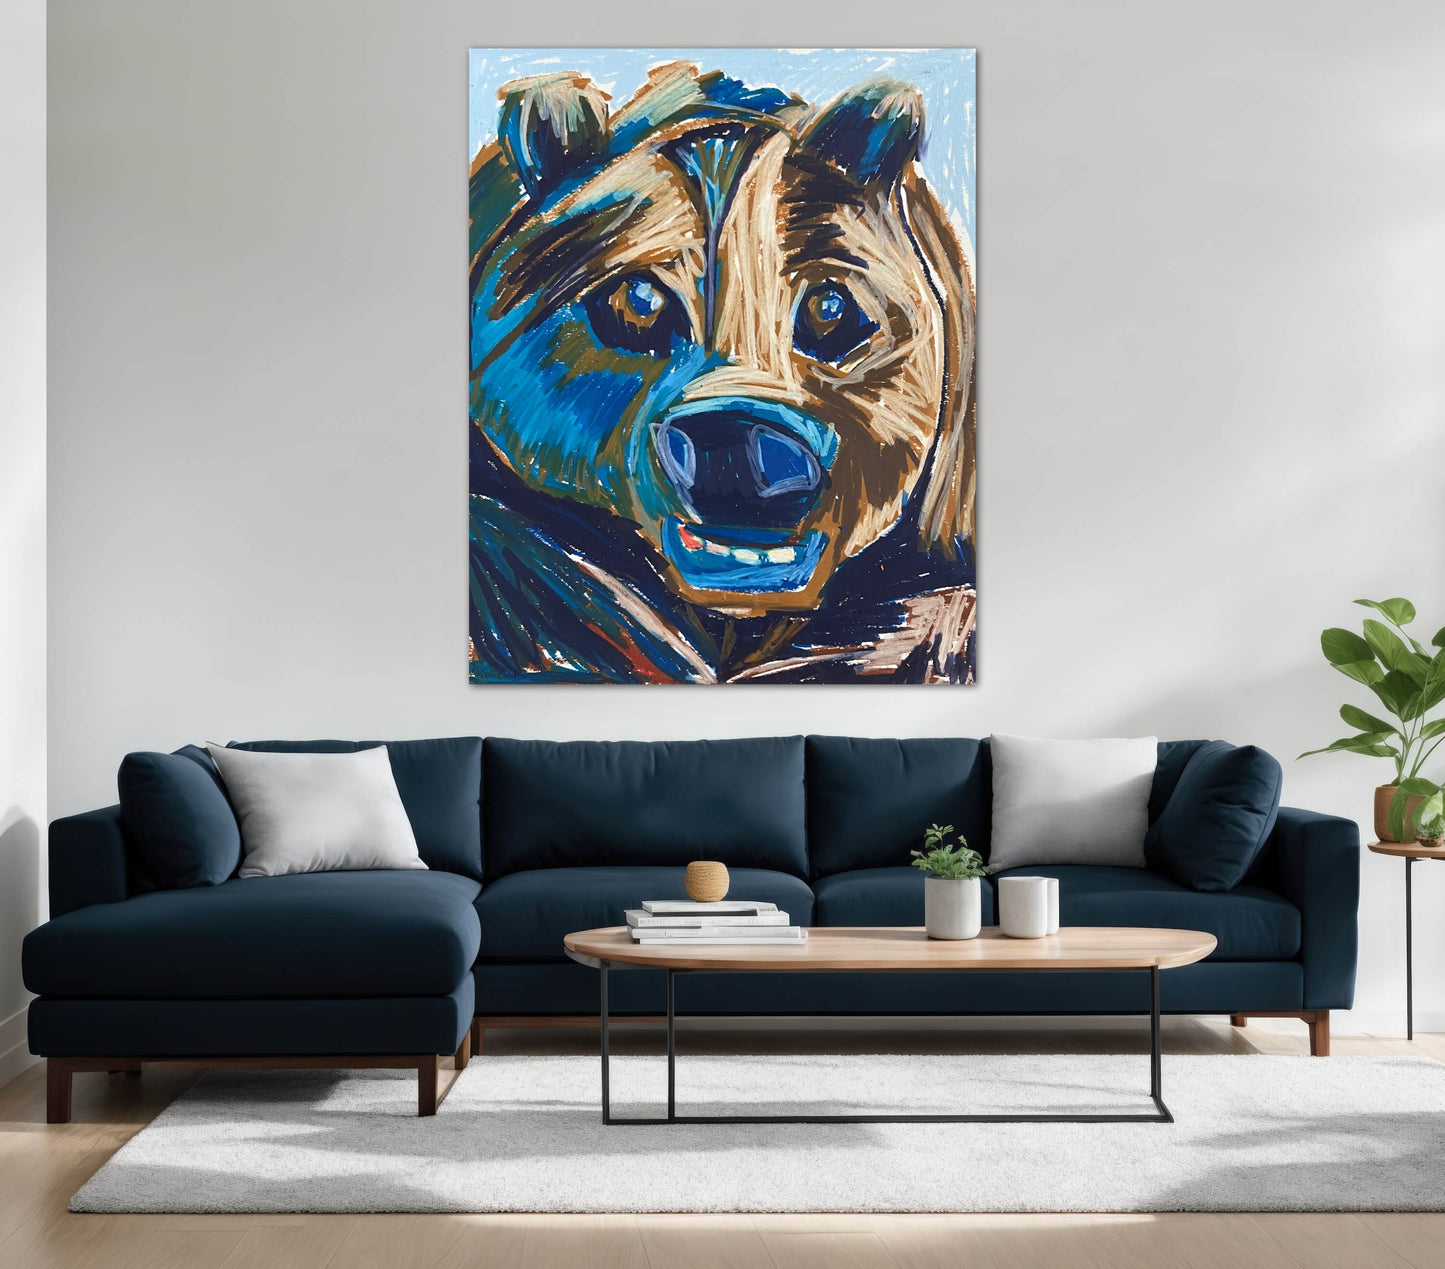 The Big Blue Bear - fine prints and canvas prints in more size